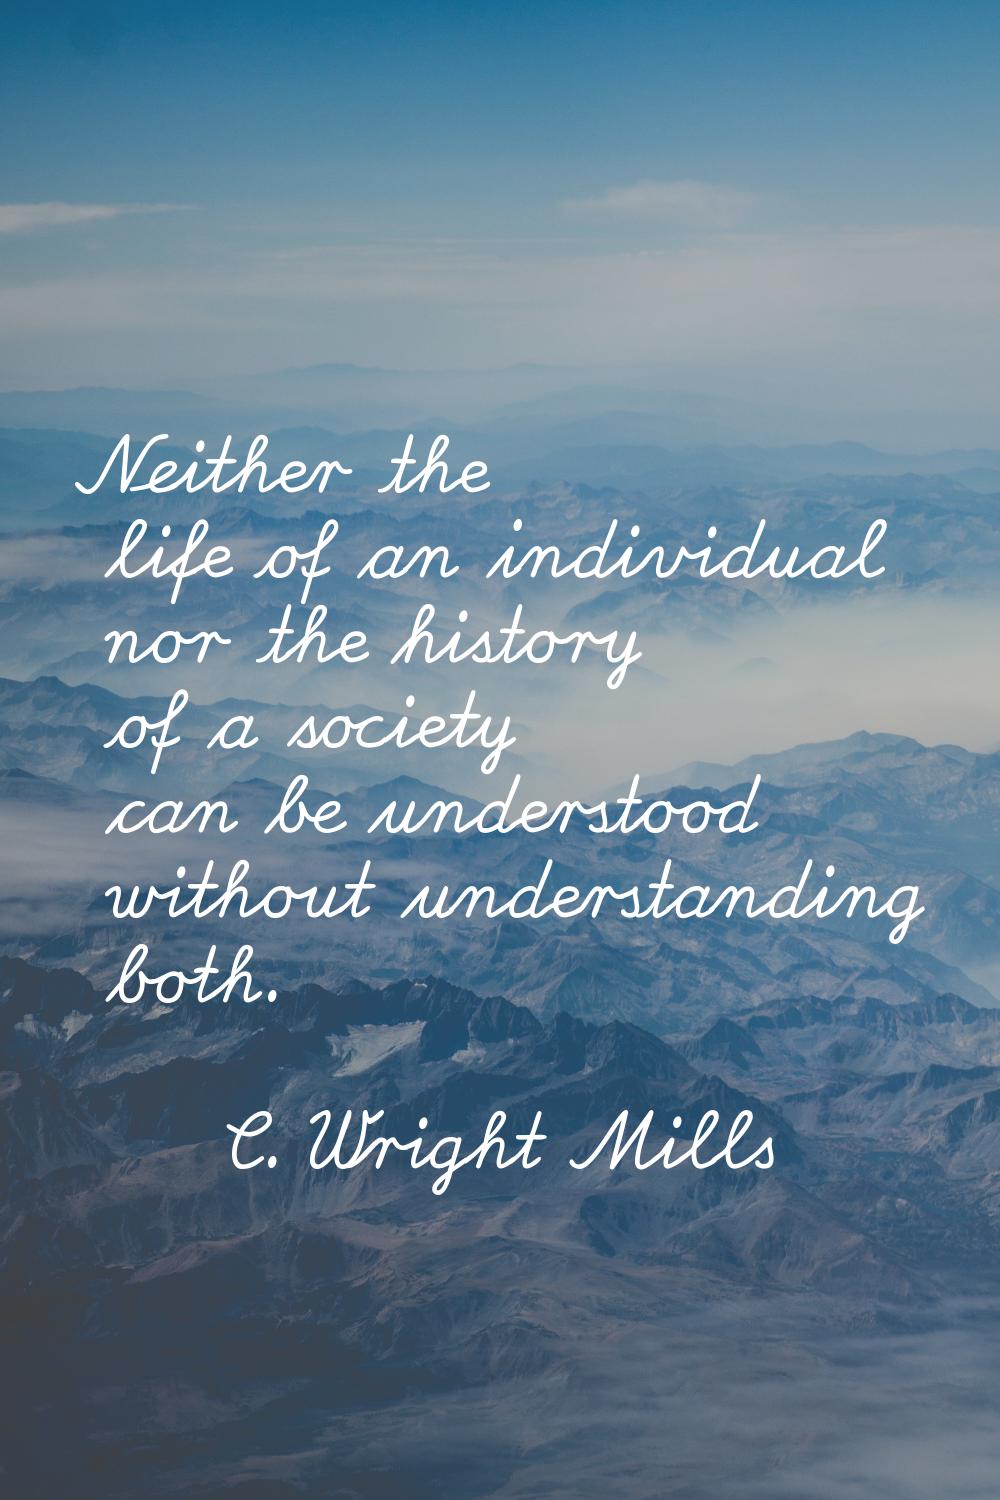 Neither the life of an individual nor the history of a society can be understood without understand